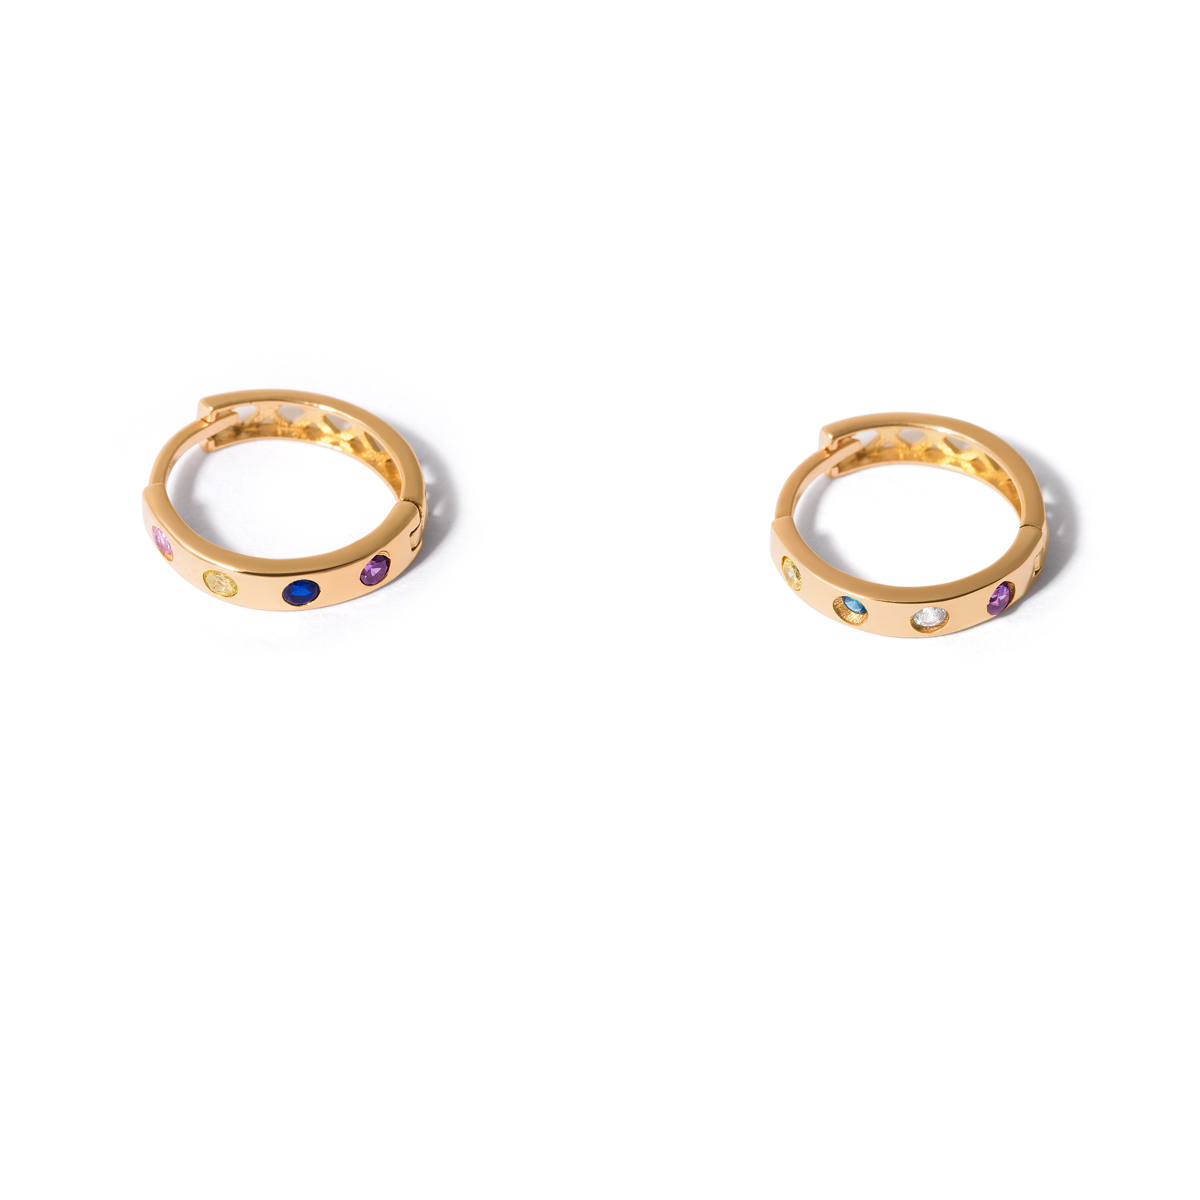 Alka colored gold ring earrings g